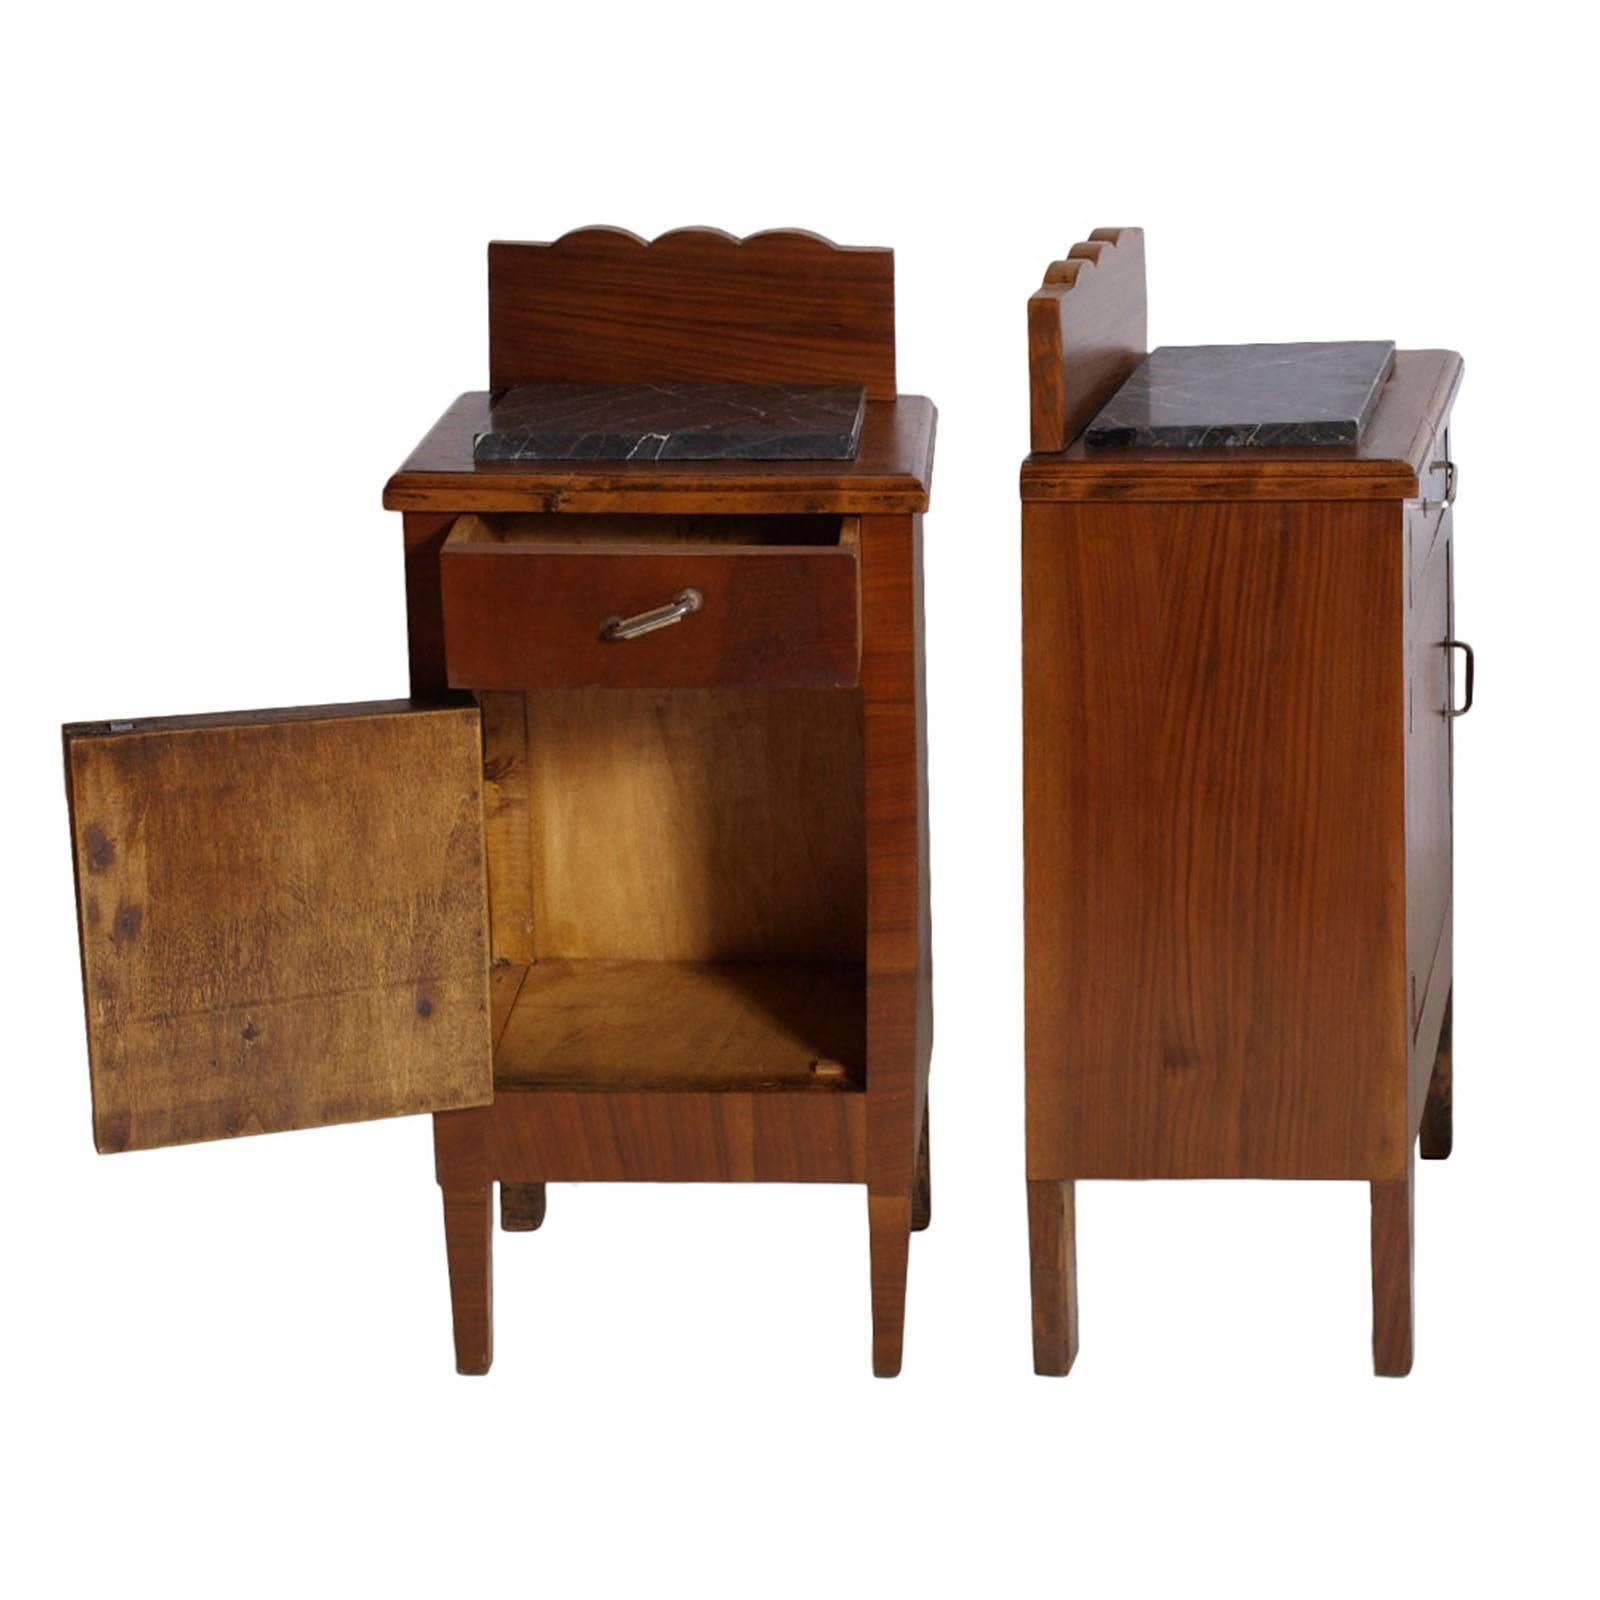 Early 20th century Art Nouveau Italian nightstands in solid walnut, with top in dark gray marble. Restored and polished to wax

Measure cm: H 78+15 x W 42 x D 32.